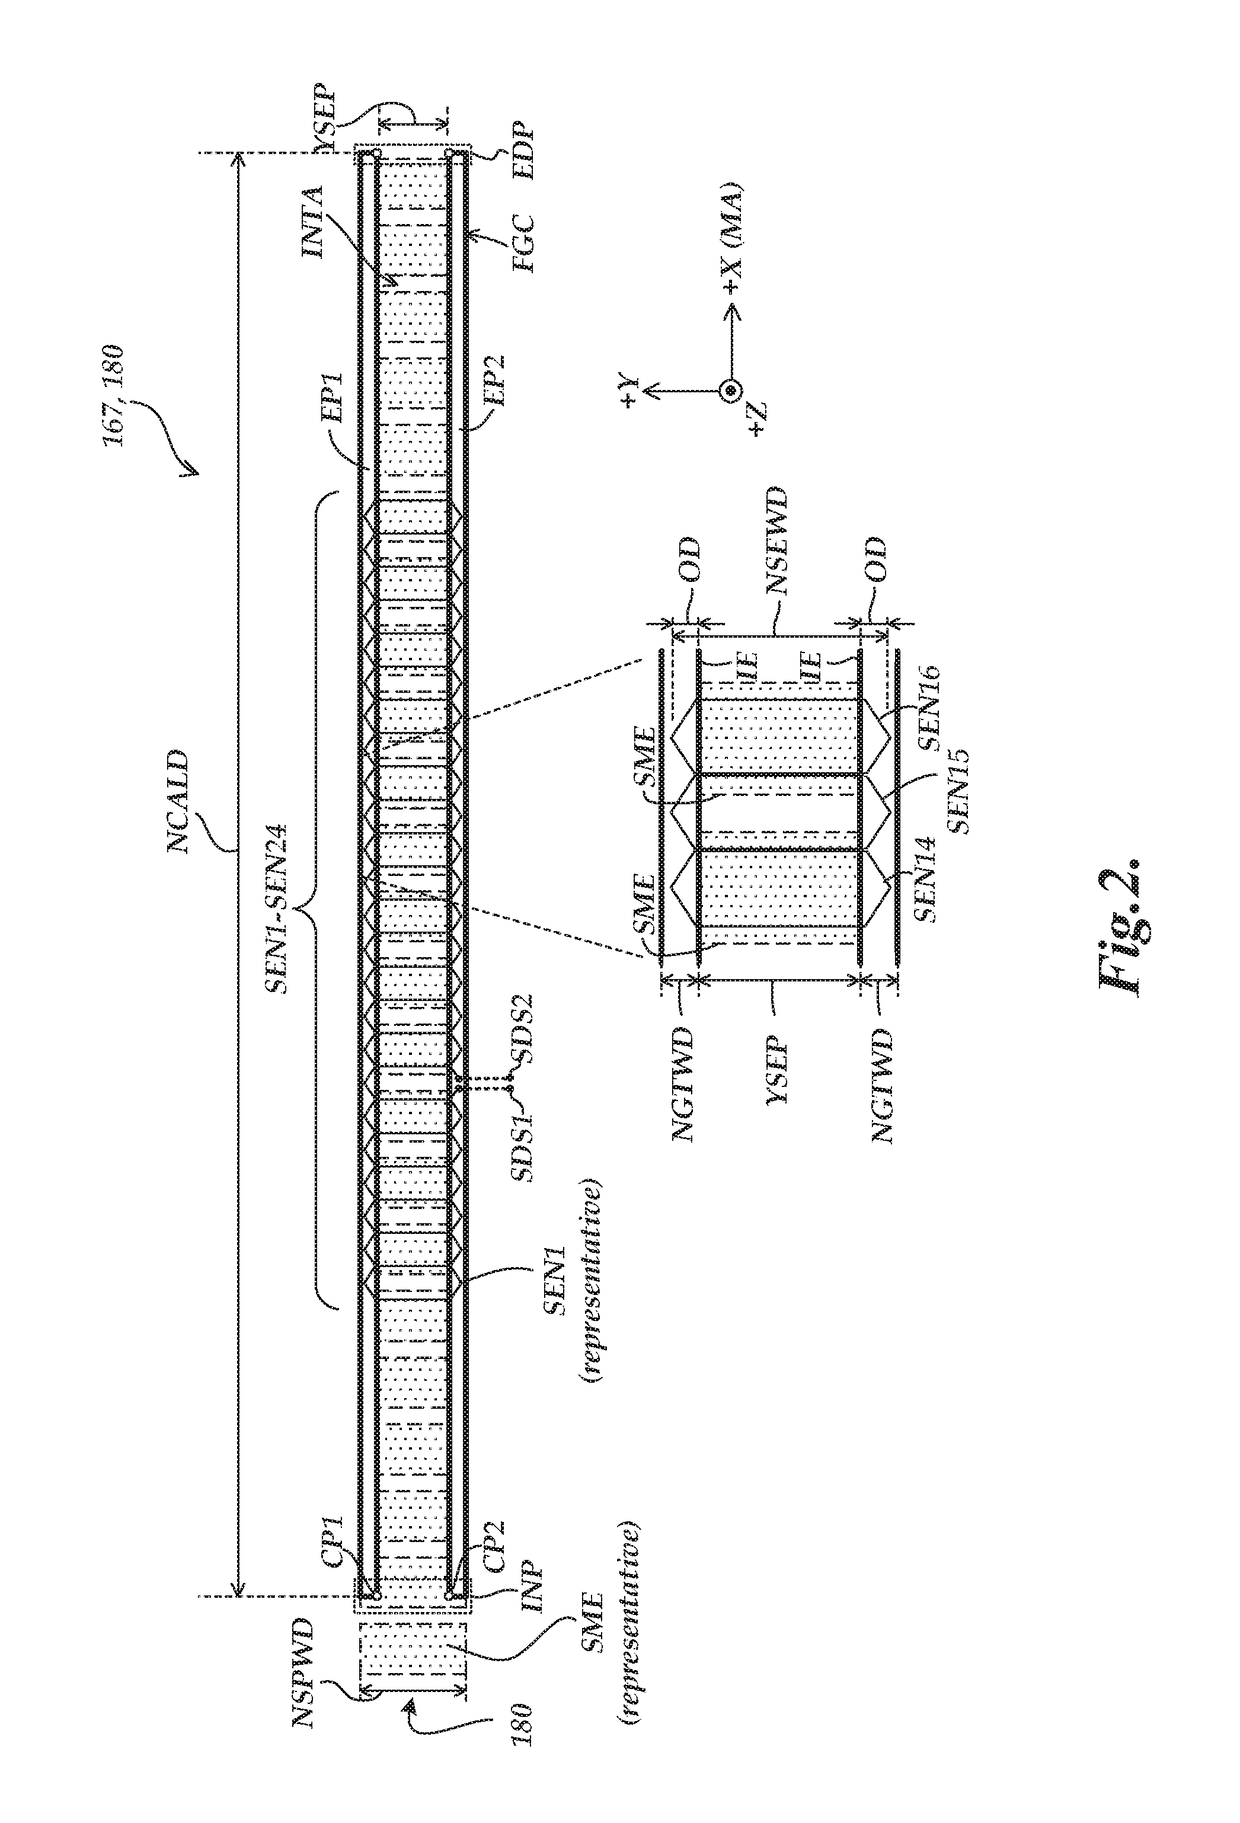 Winding and scale configuration for inductive position encoder